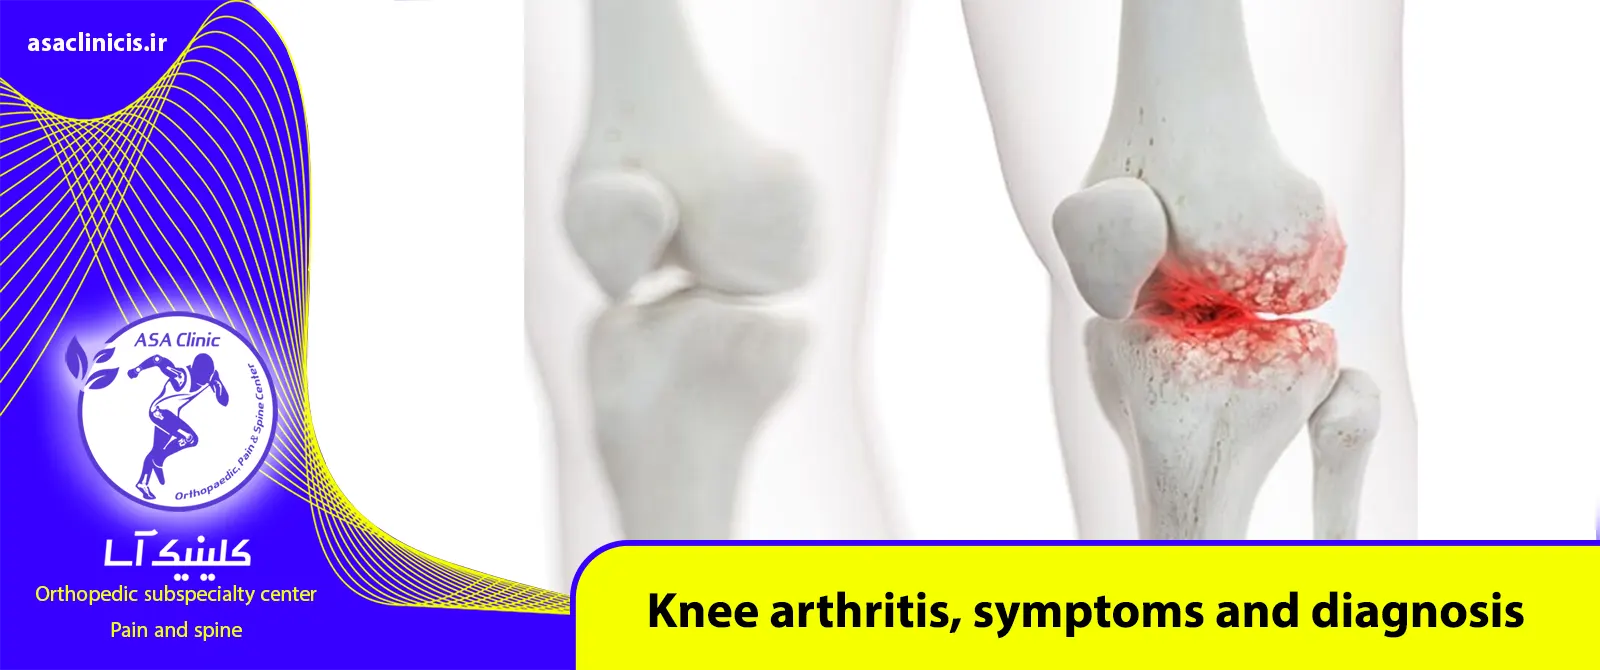 Treatment of knee arthritis and home diagnosis